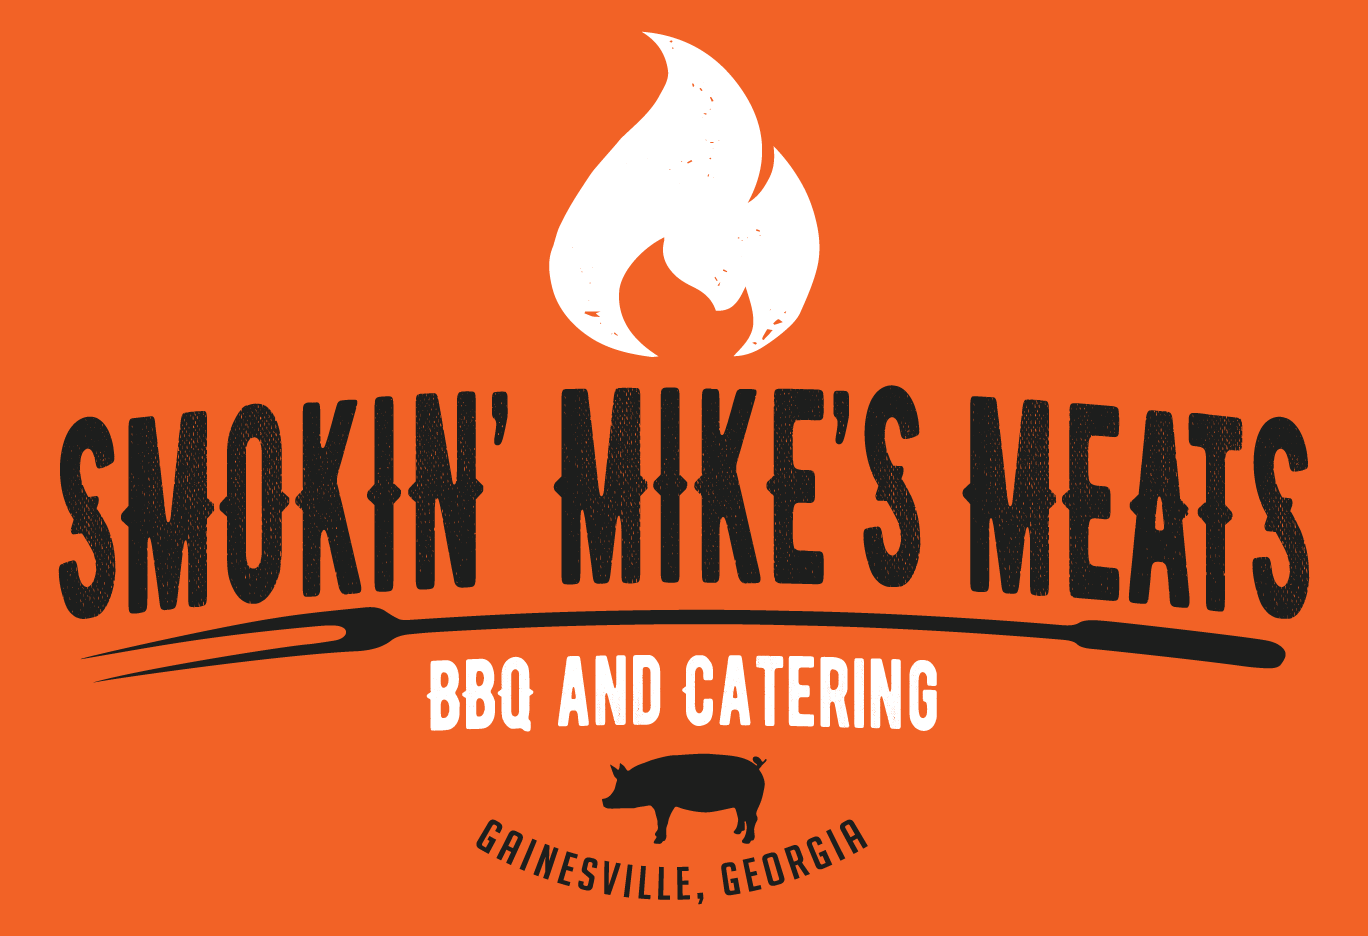 Smokin’ Mike’s Meats Take-Out BBQ and Full-Service Catering 